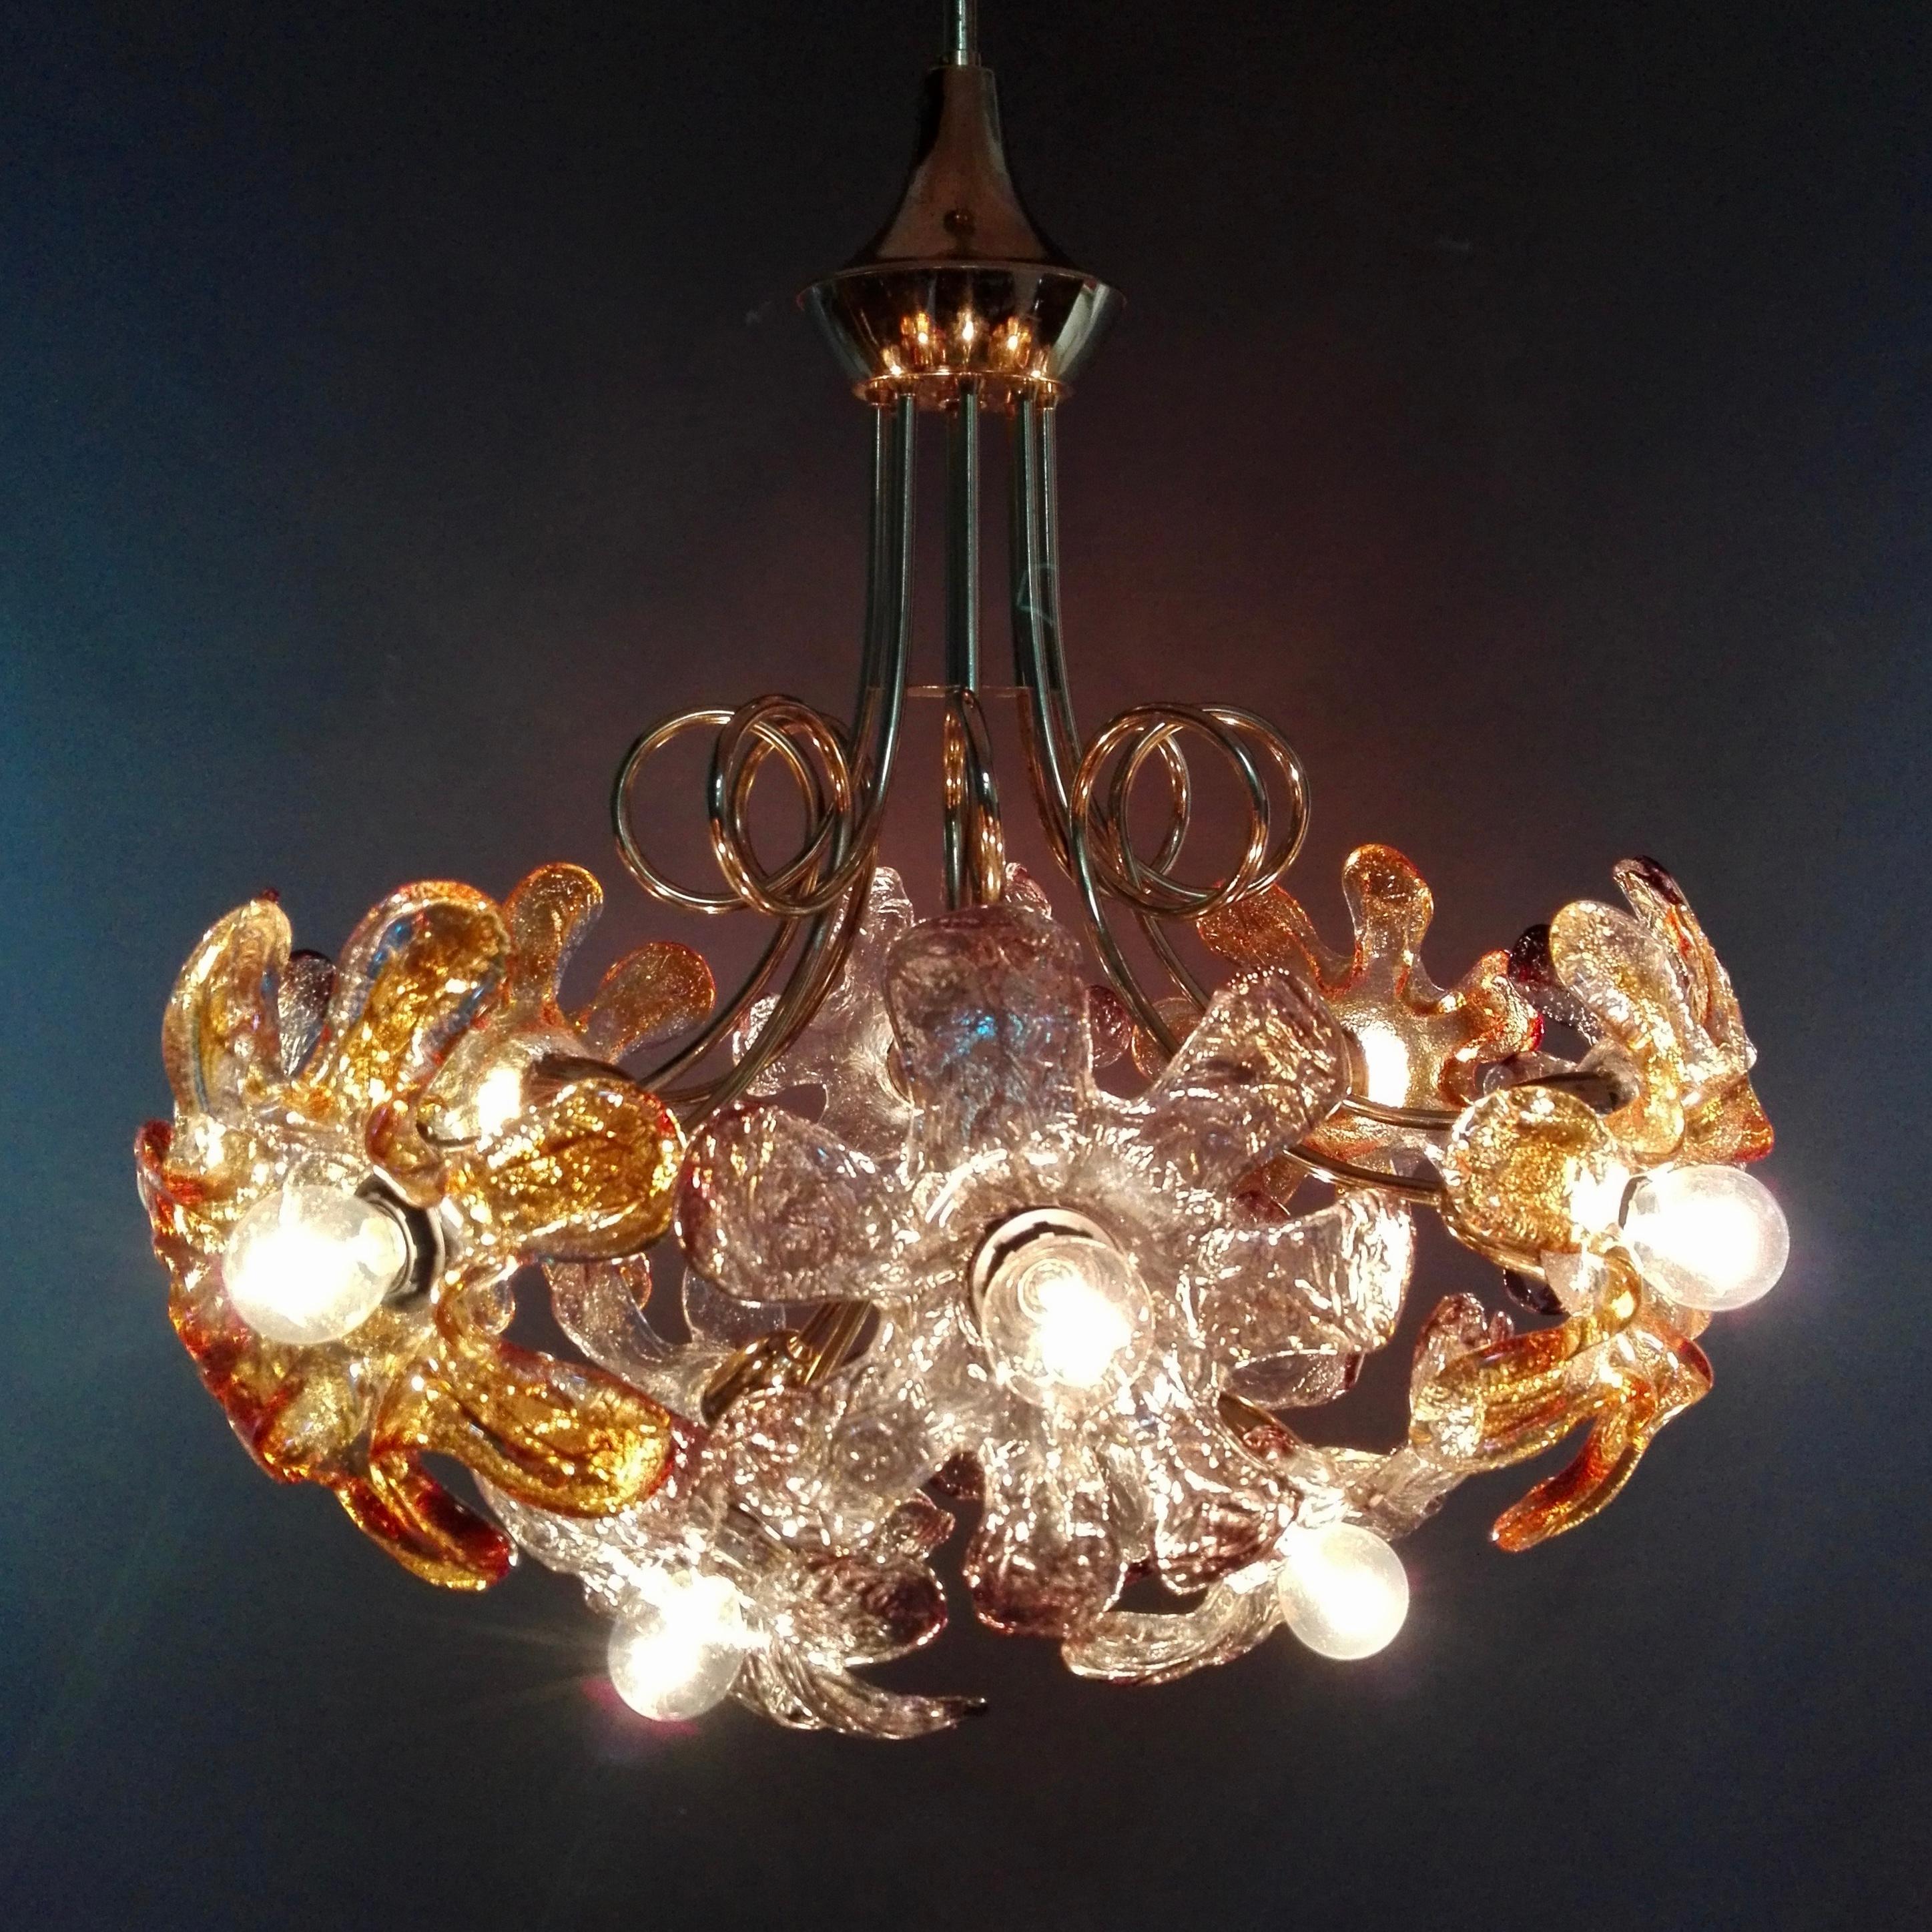 1960s Mazzega Twelve-Light Chandelier with Flower-Shaped Murano Art Glass Shades For Sale 1